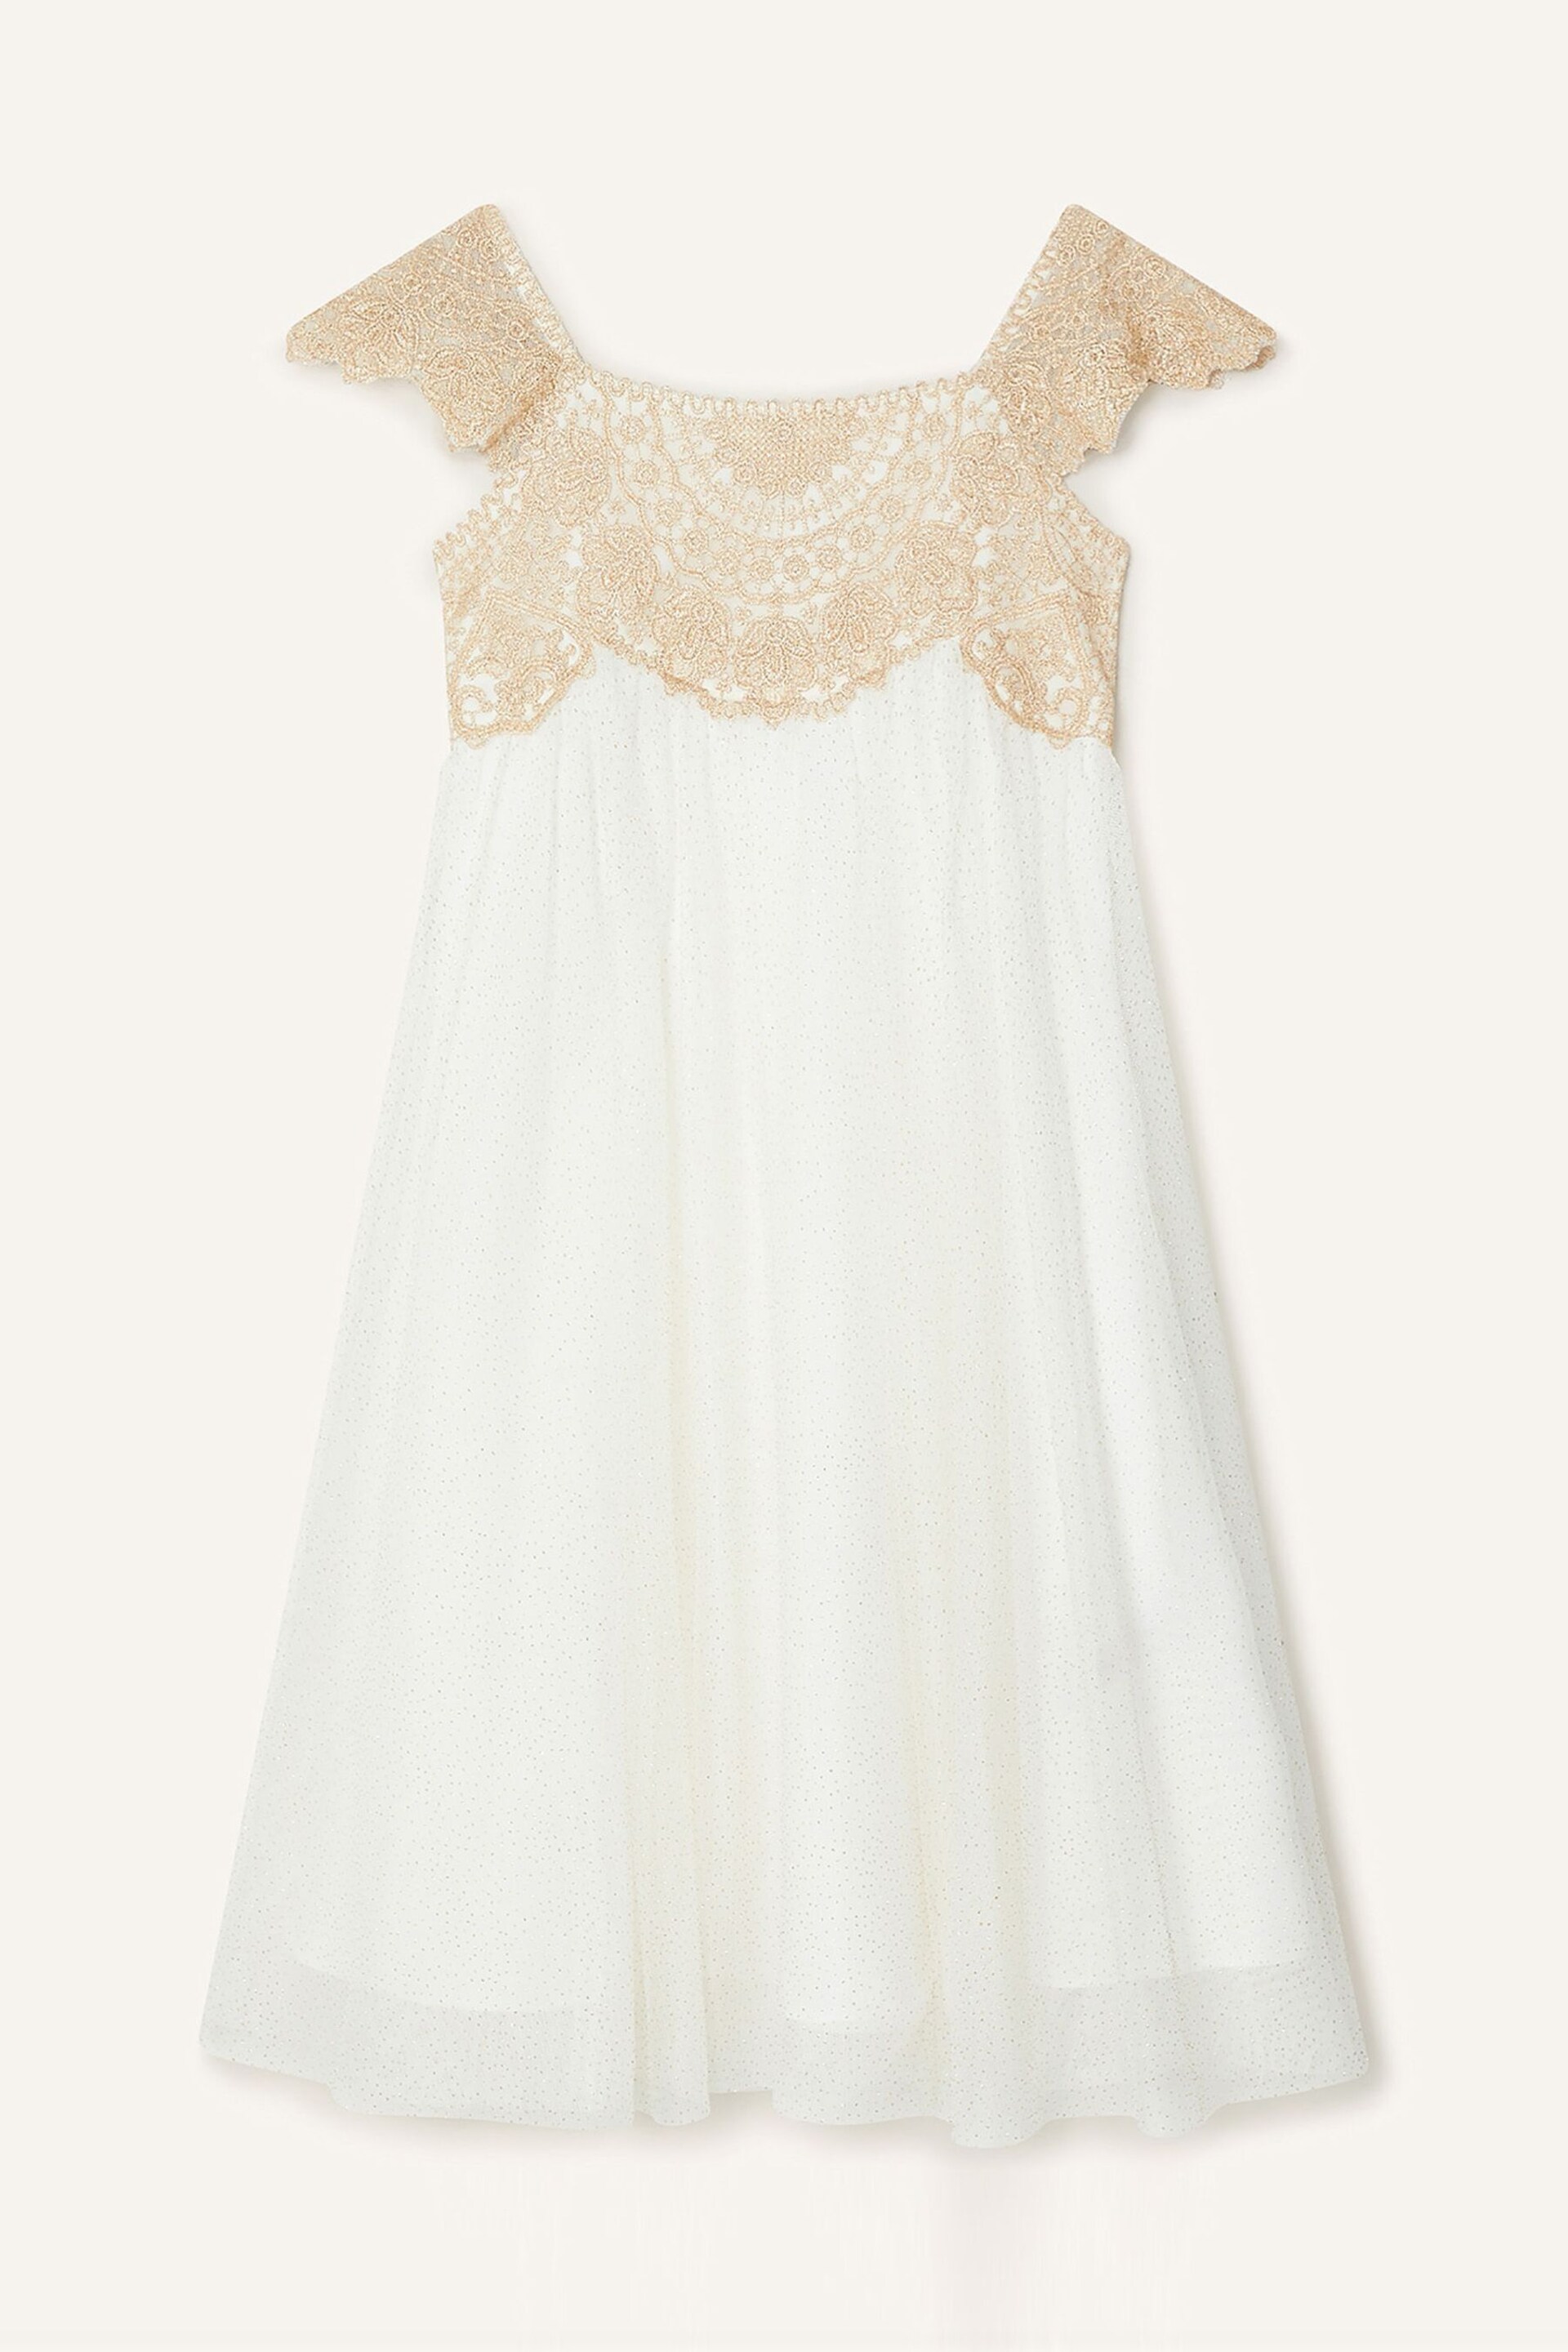 Monsoon Gold Estella Embroidered Dress - Image 1 of 3